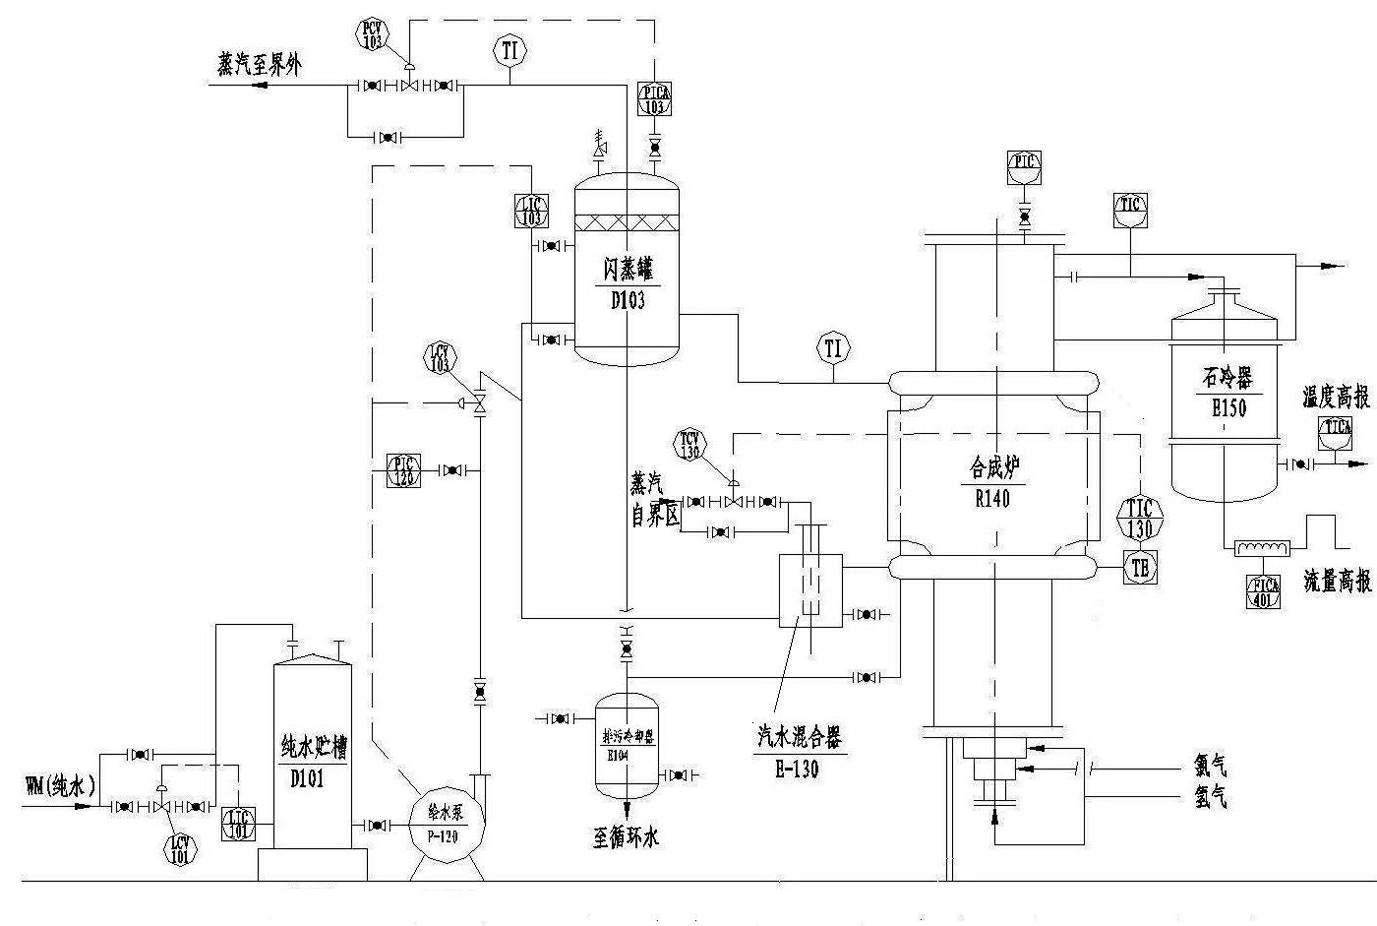 Technology for secondarily producing medium pressure steam during synthesizing chlorine and hydrogen into hydrogen chloride and equipment thereof